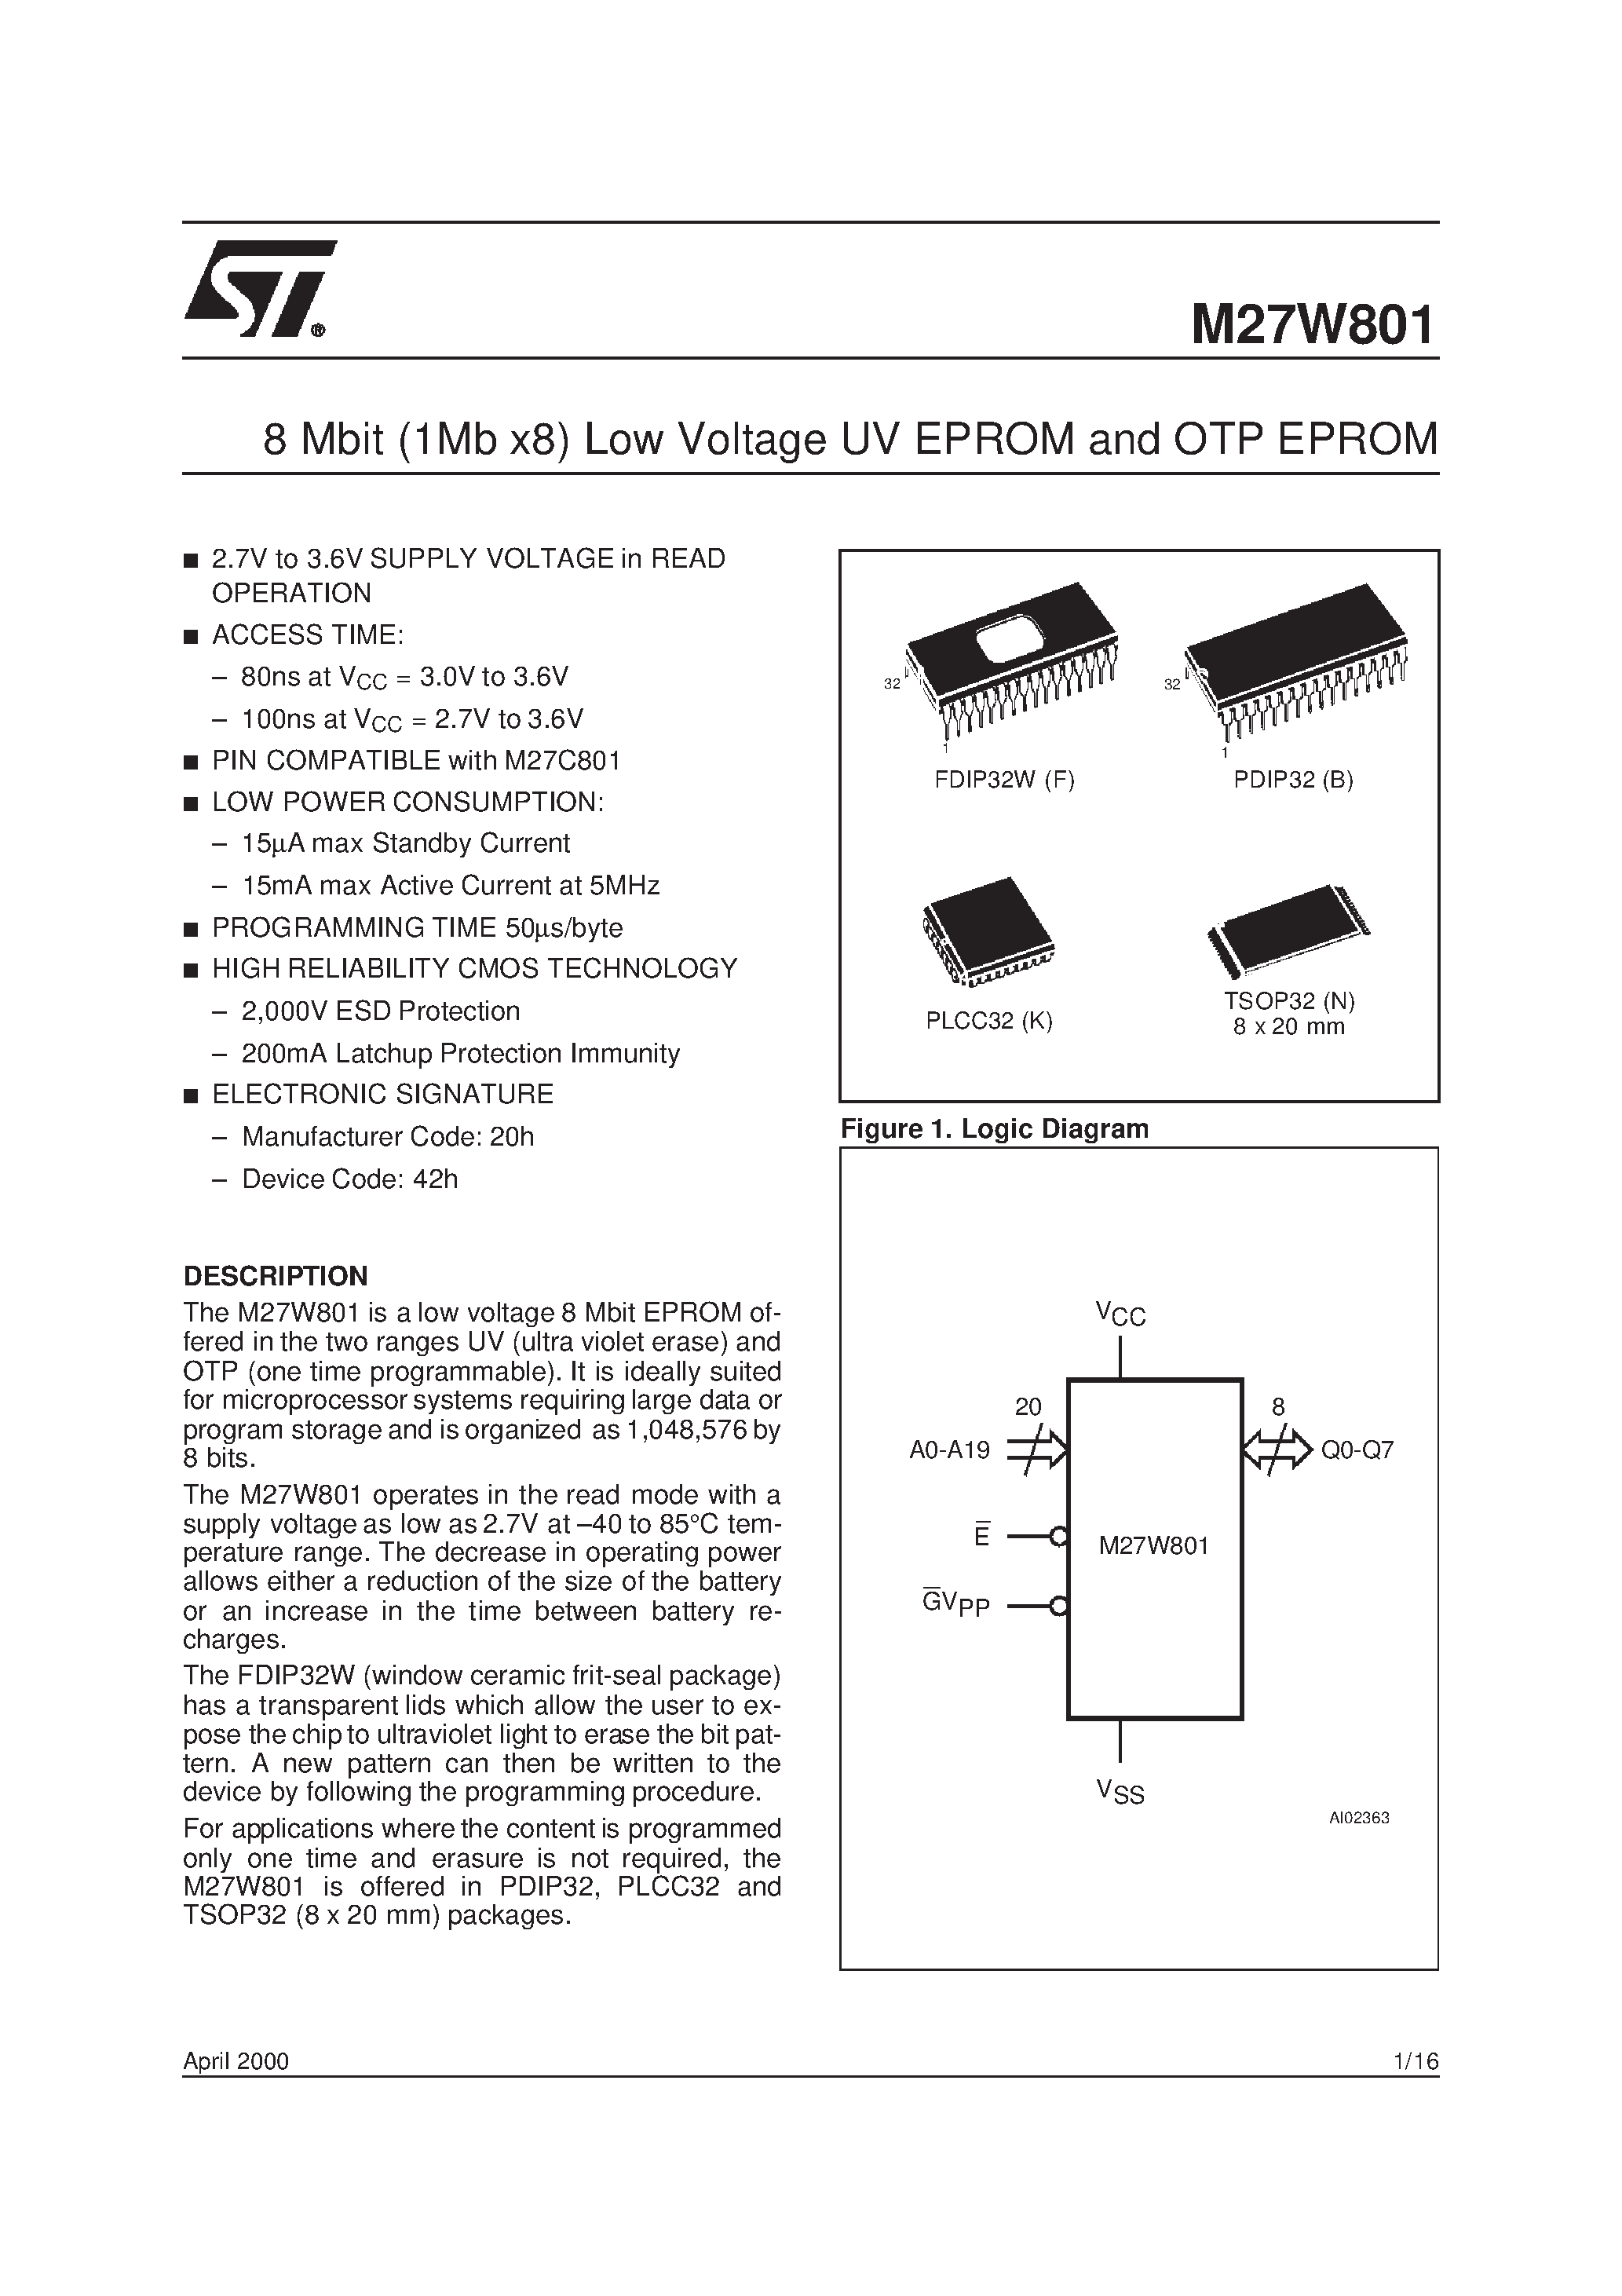 Datasheet M27W801-100F6TR - 8 Mbit 1Mb x8 Low Voltage UV EPROM and OTP EPROM page 1